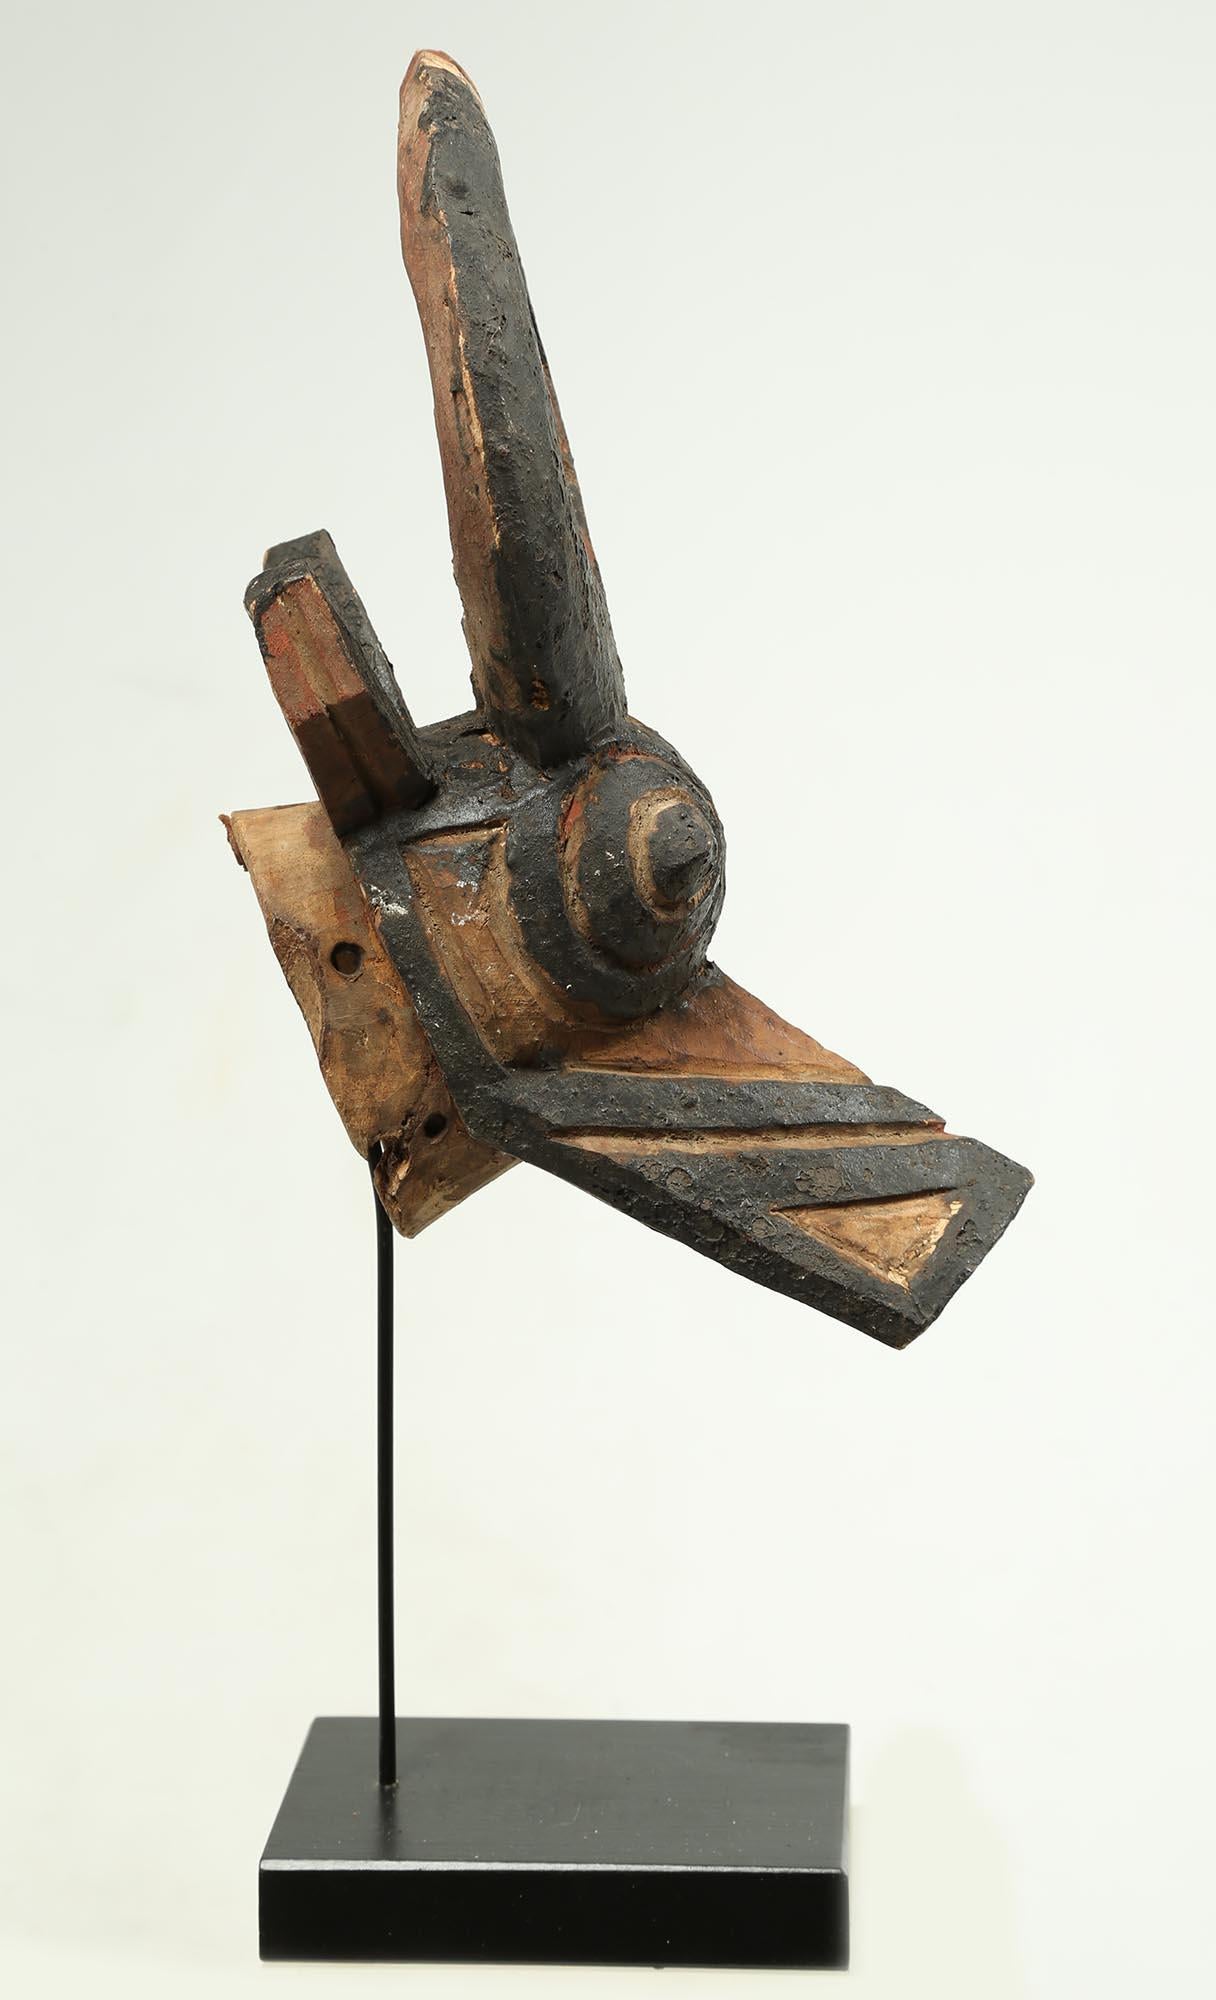 Hand-Carved Contented Bush-Cow Mask, Burkina Faso, Early 20th Century Africa